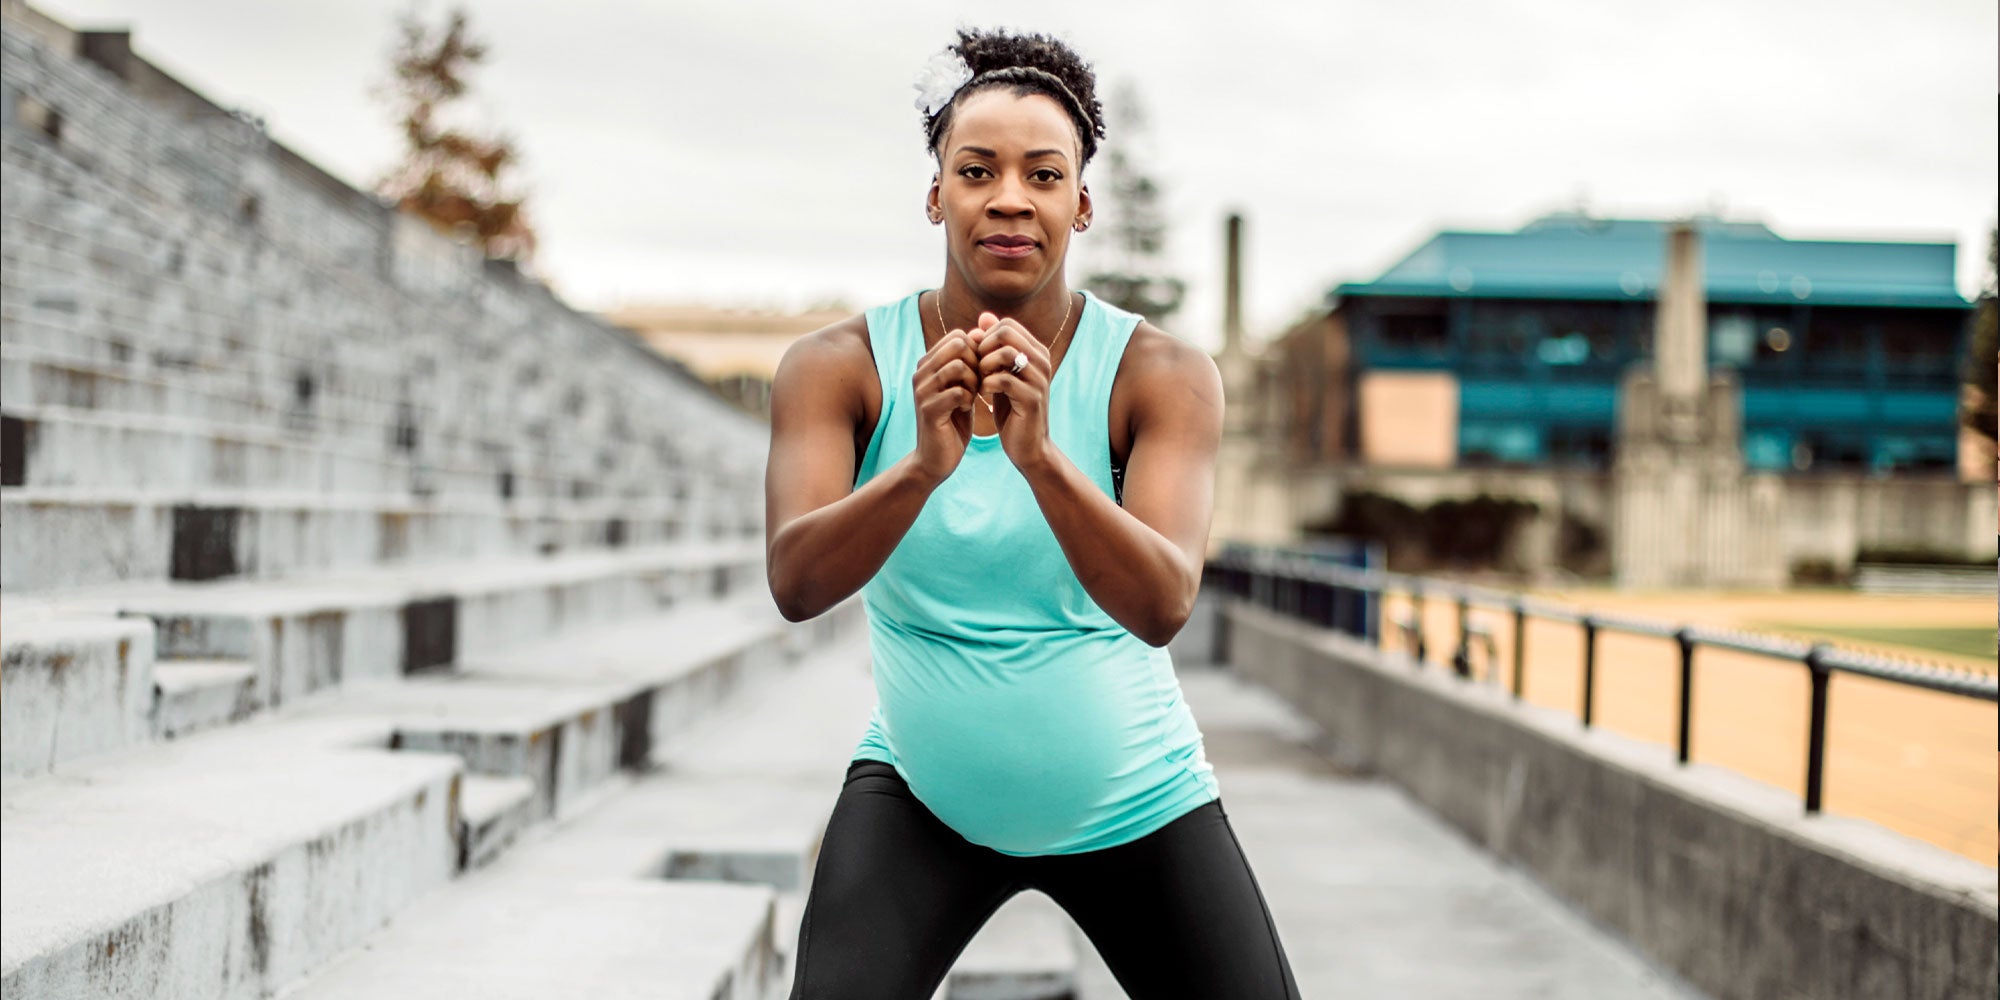 How to Find the Best Sports Bra for Pregnancy.